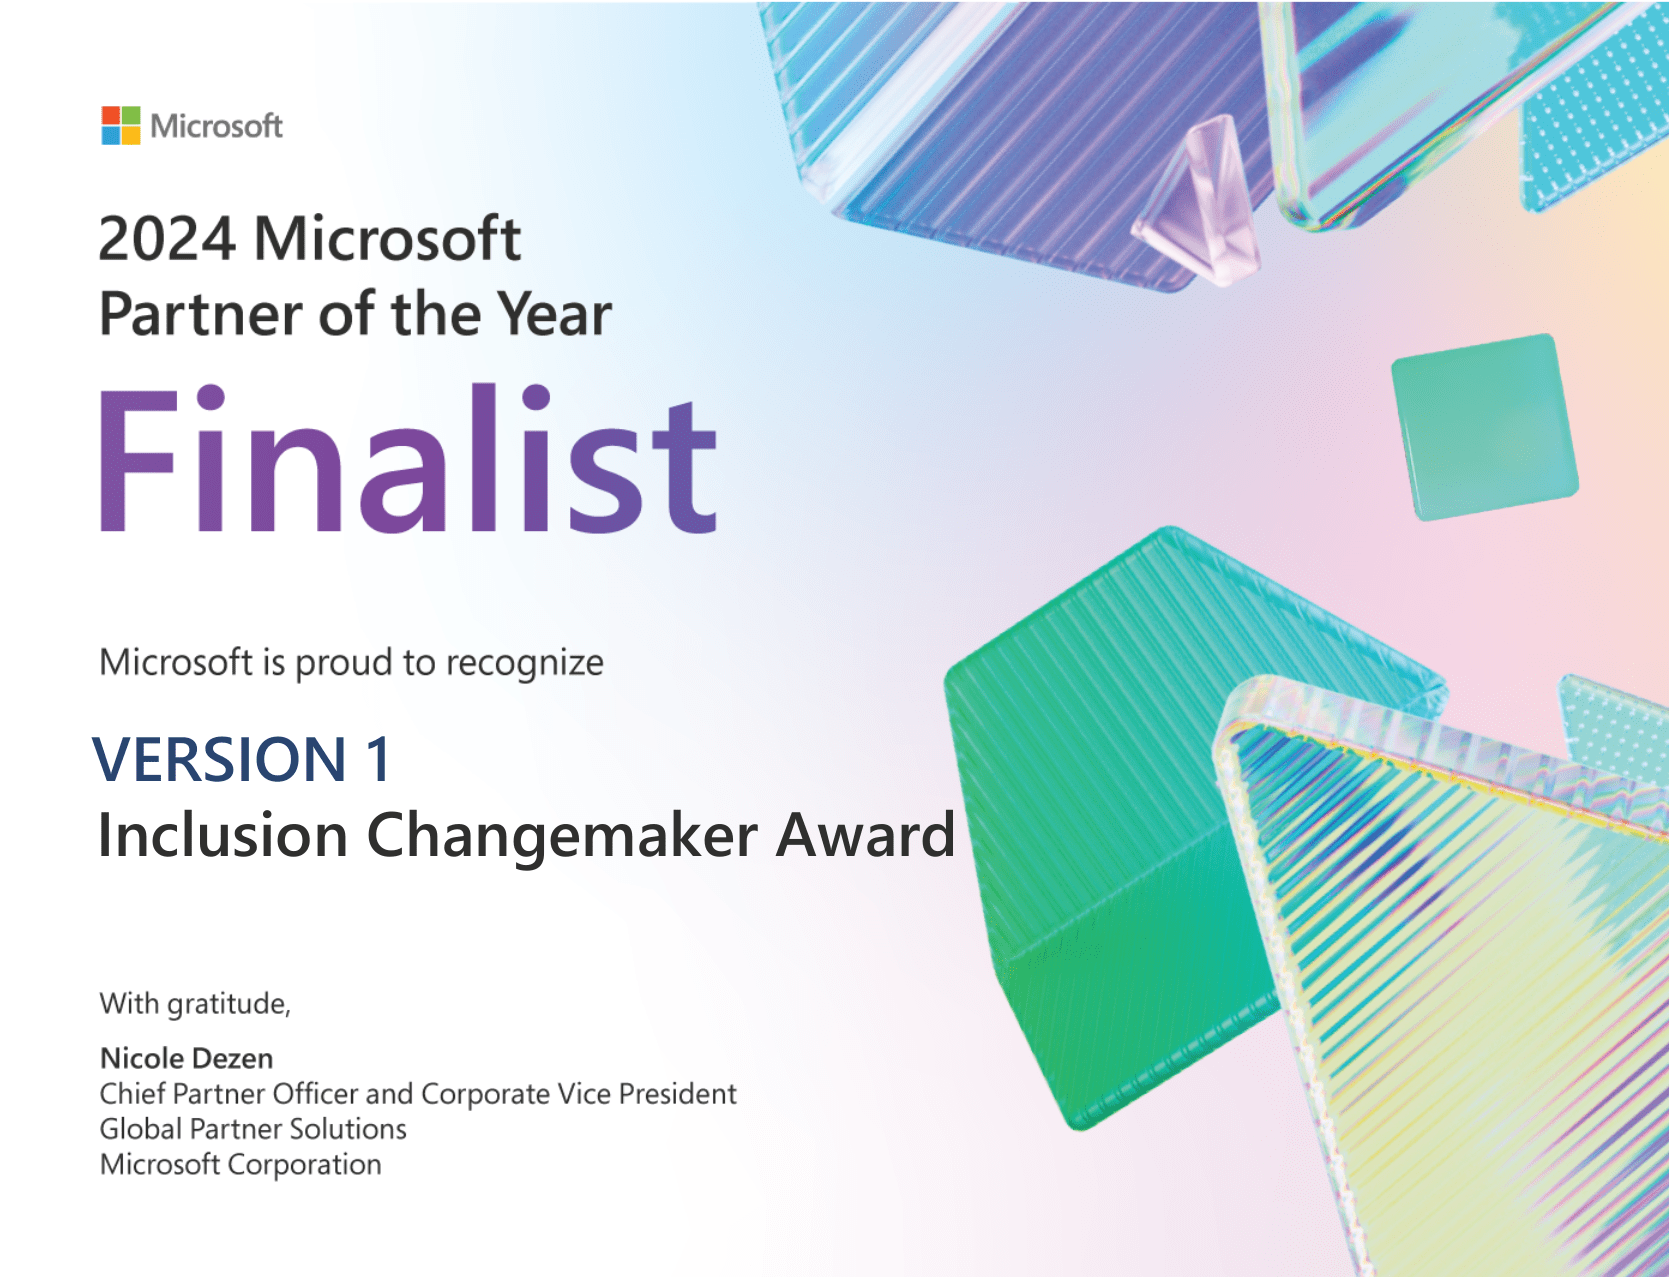 An award certificate from Microsoft titled ‘2024 Microsoft Partner of the Year Finalist’ for the ‘Version 1 Inclusion Changemaker Award’. The certificate has a modern design with abstract geometric shapes in teal and purple hues, and the Microsoft logo at the top left corner. It includes a note of gratitude from Nicole Dezen, Chief Partner Officer and Corporate Vice President, Microsoft Corporation.